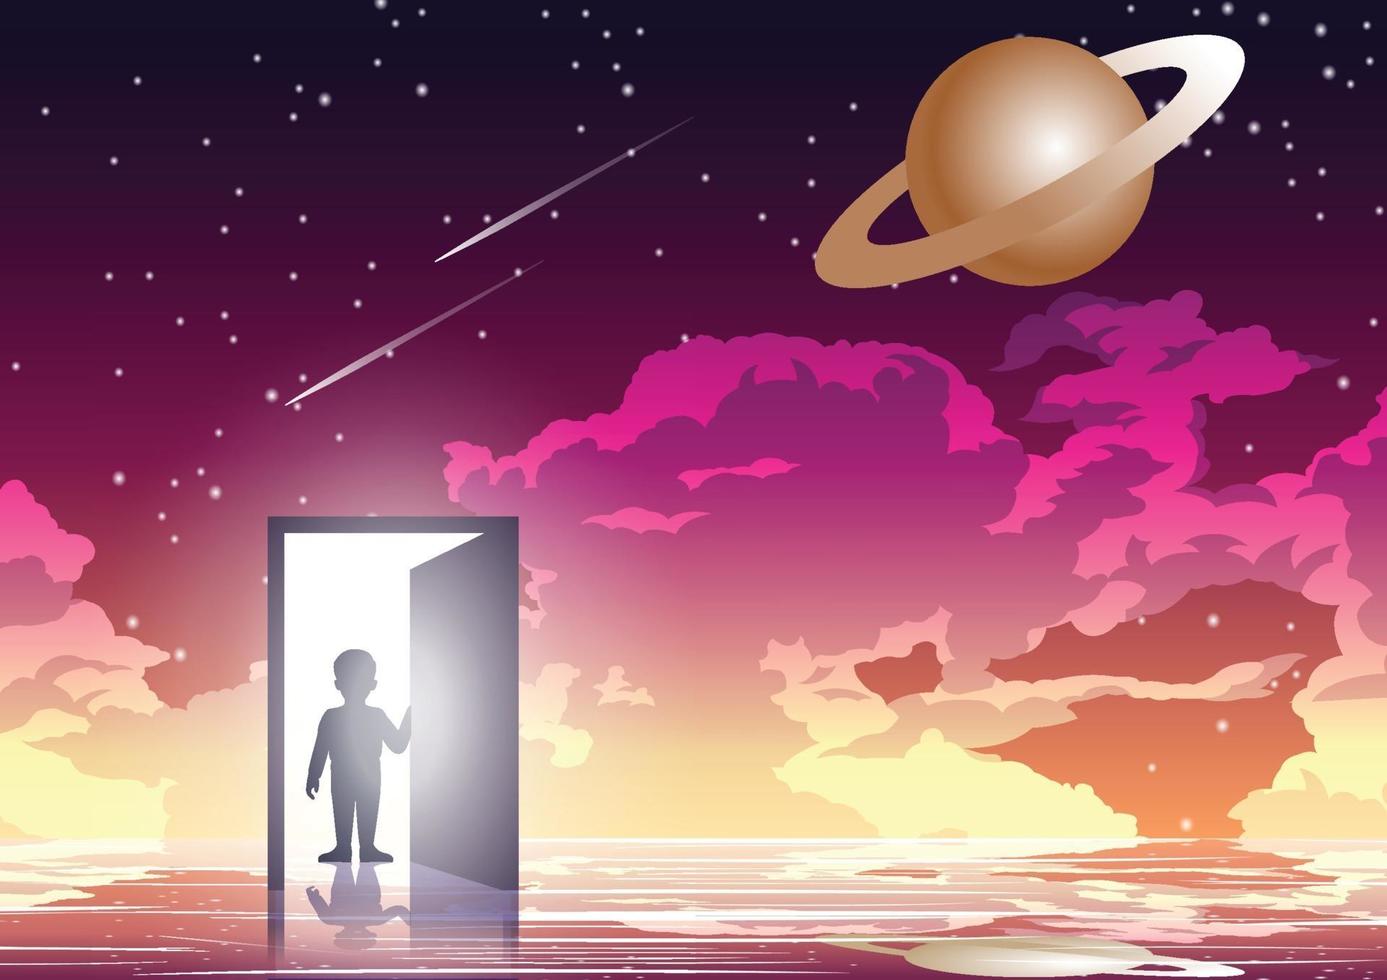 Silhouette of boy opening dimensional gate vector